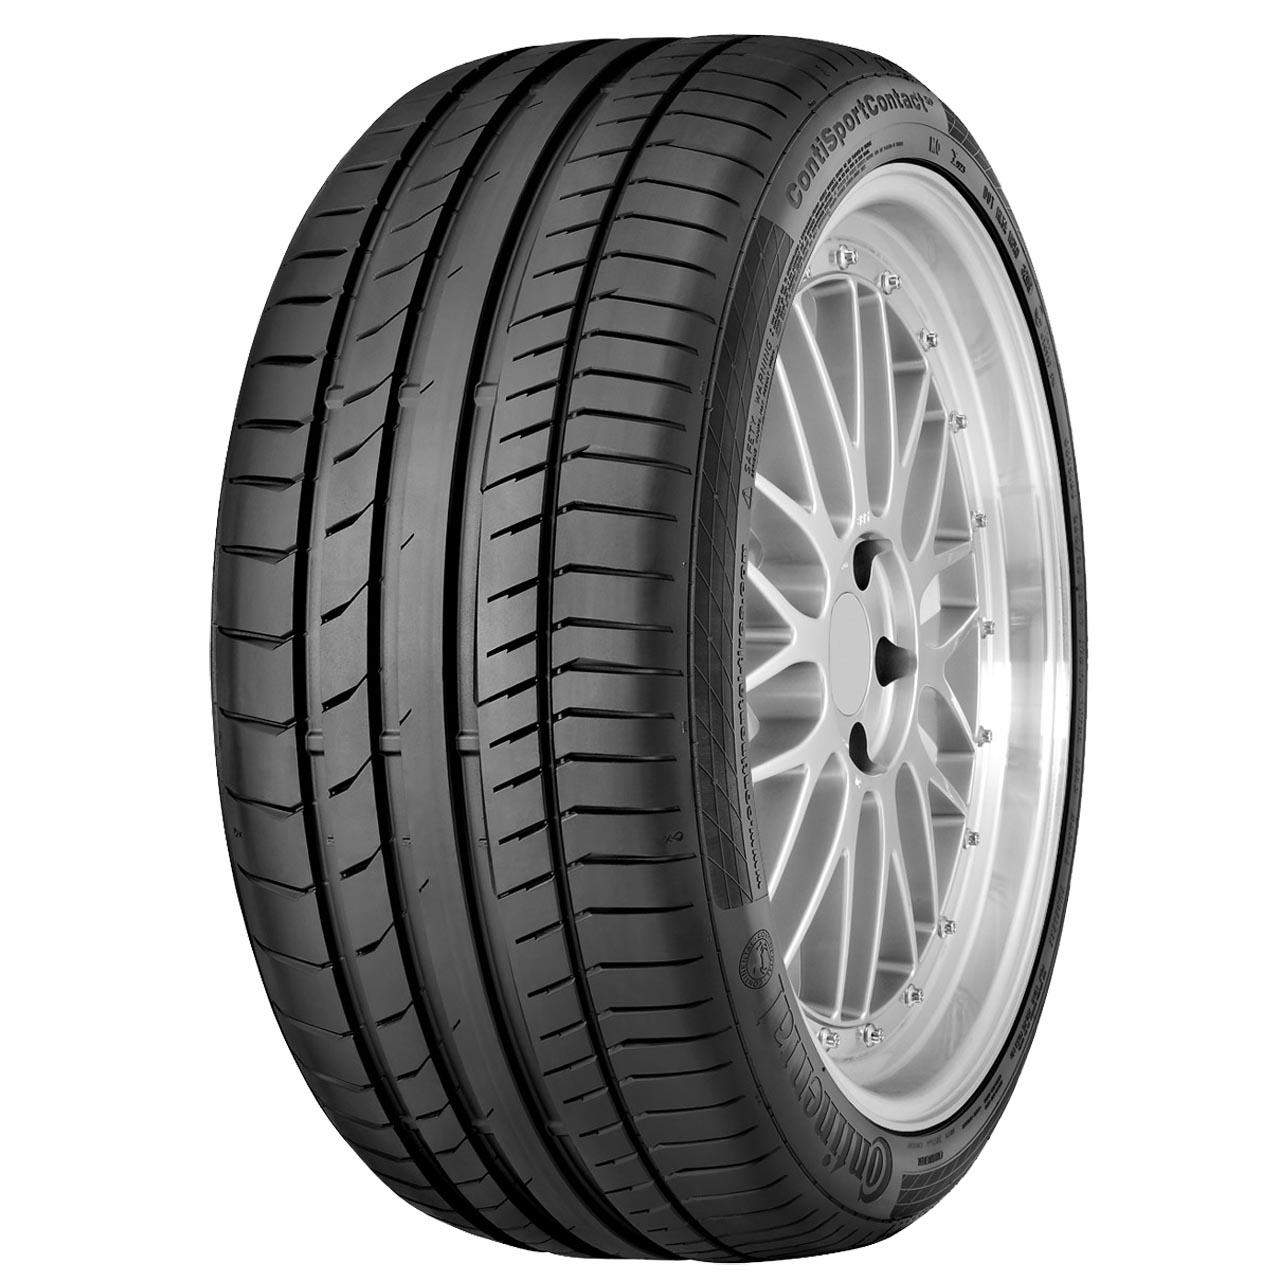 Continental CONTISPORTCONTACT 5P 245/35ZR21 96Y XL T0 SIL